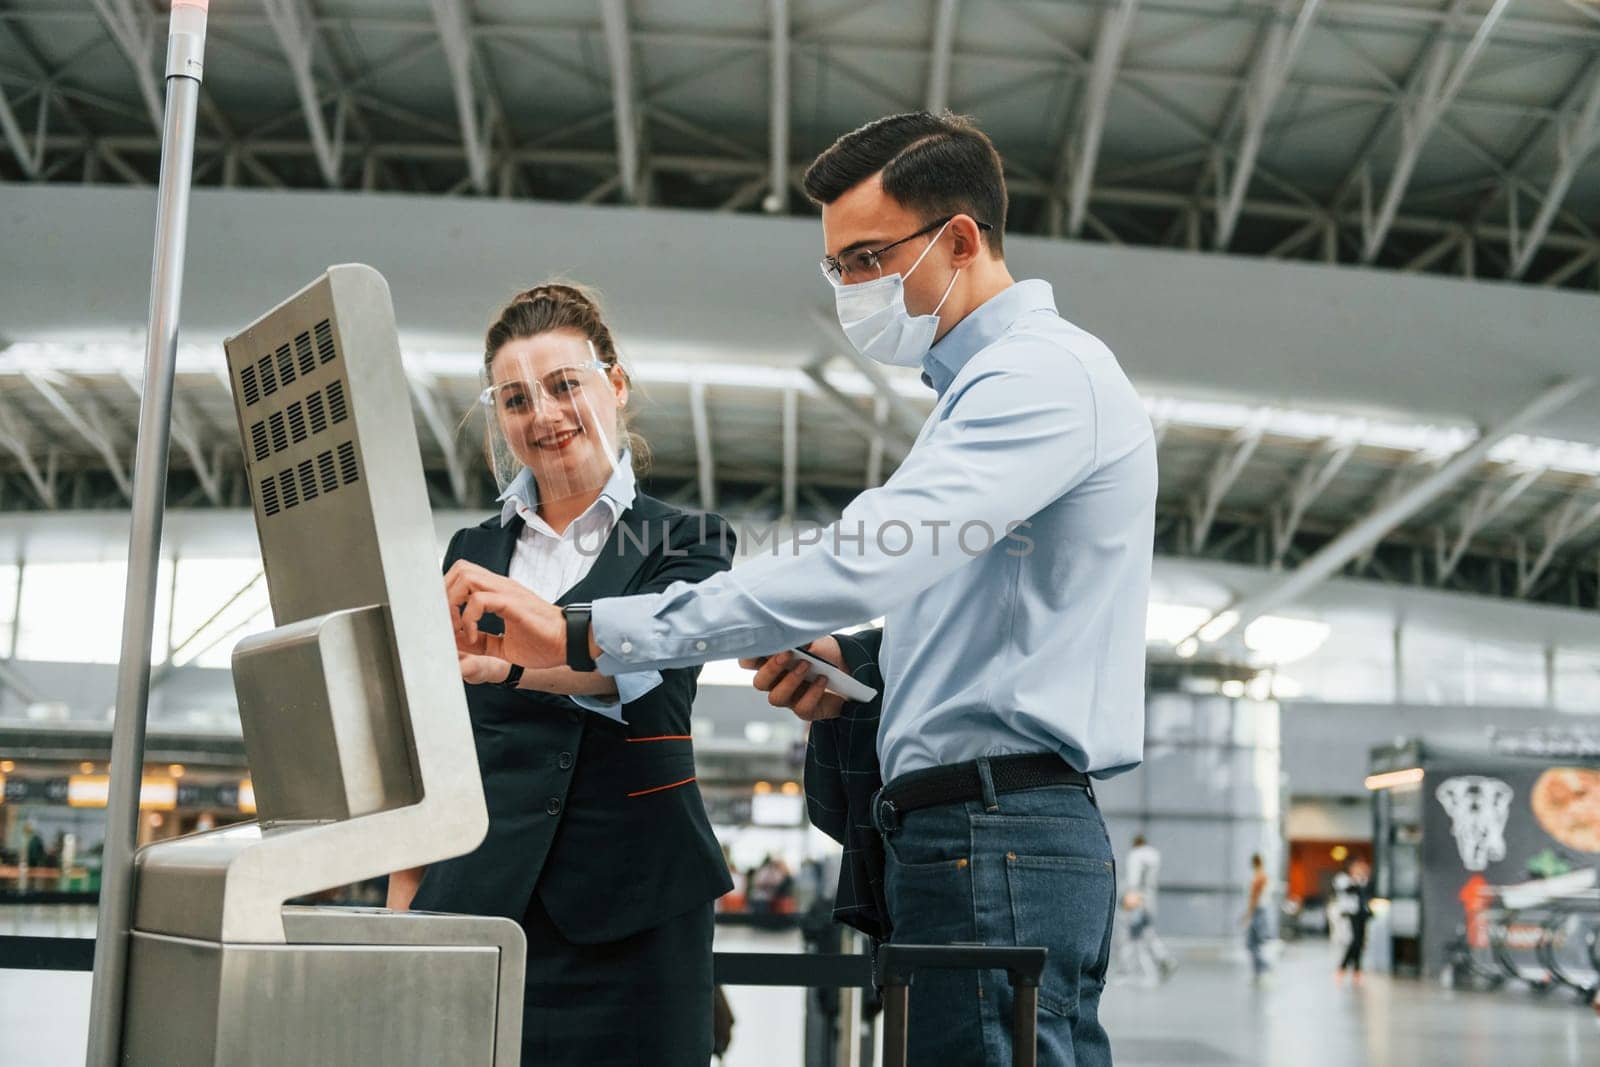 Employee helping using terminal. Young businessman in formal clothes is in the airport at daytime.